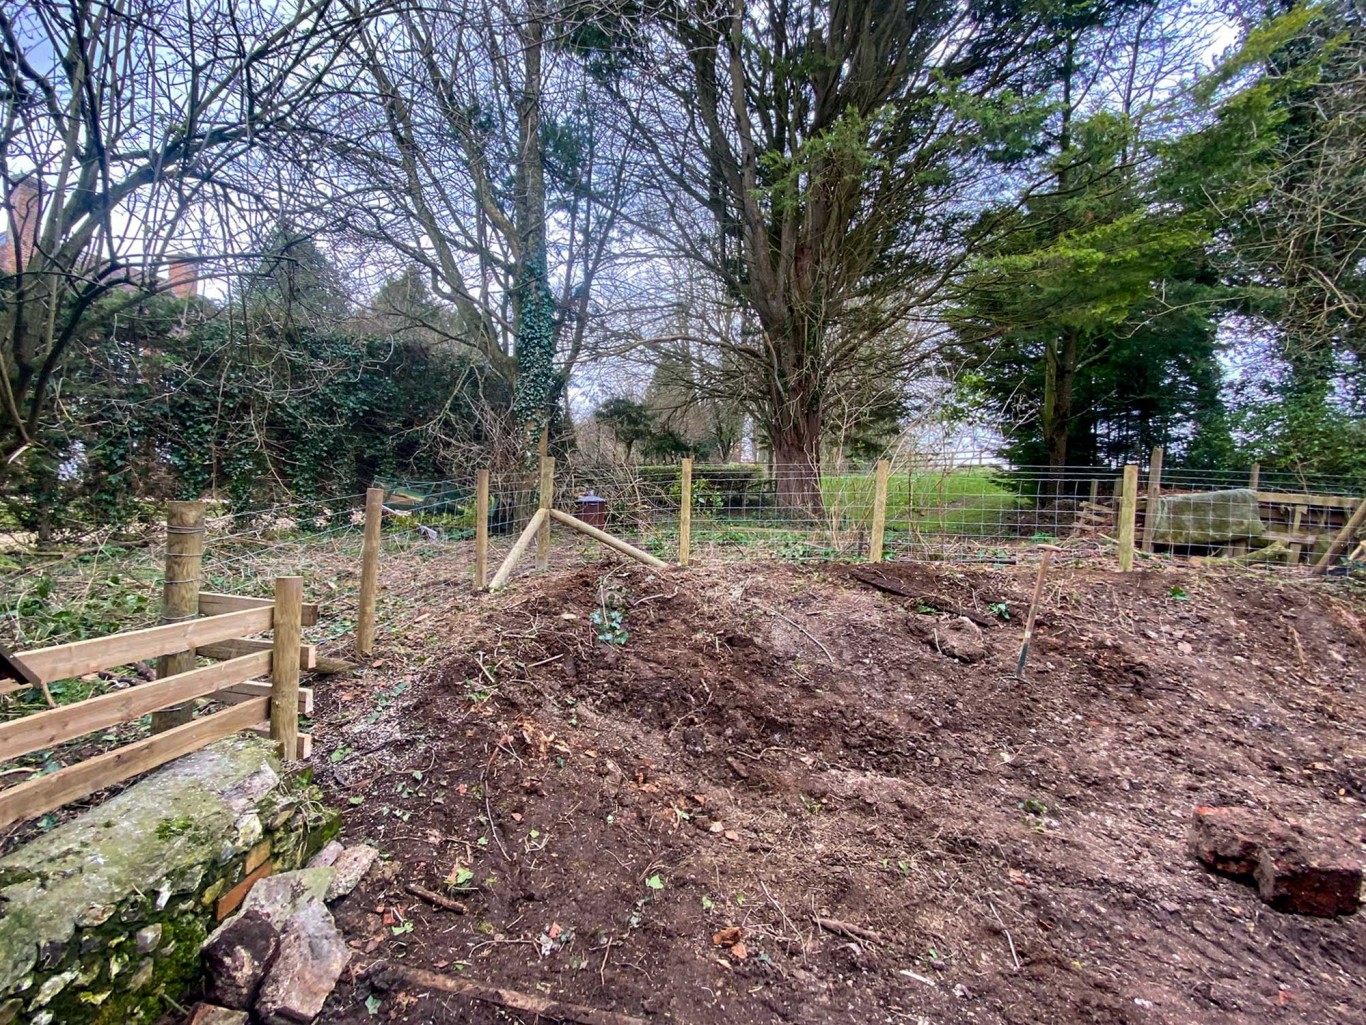 Stock fencing going around an area that has recently been dug up.